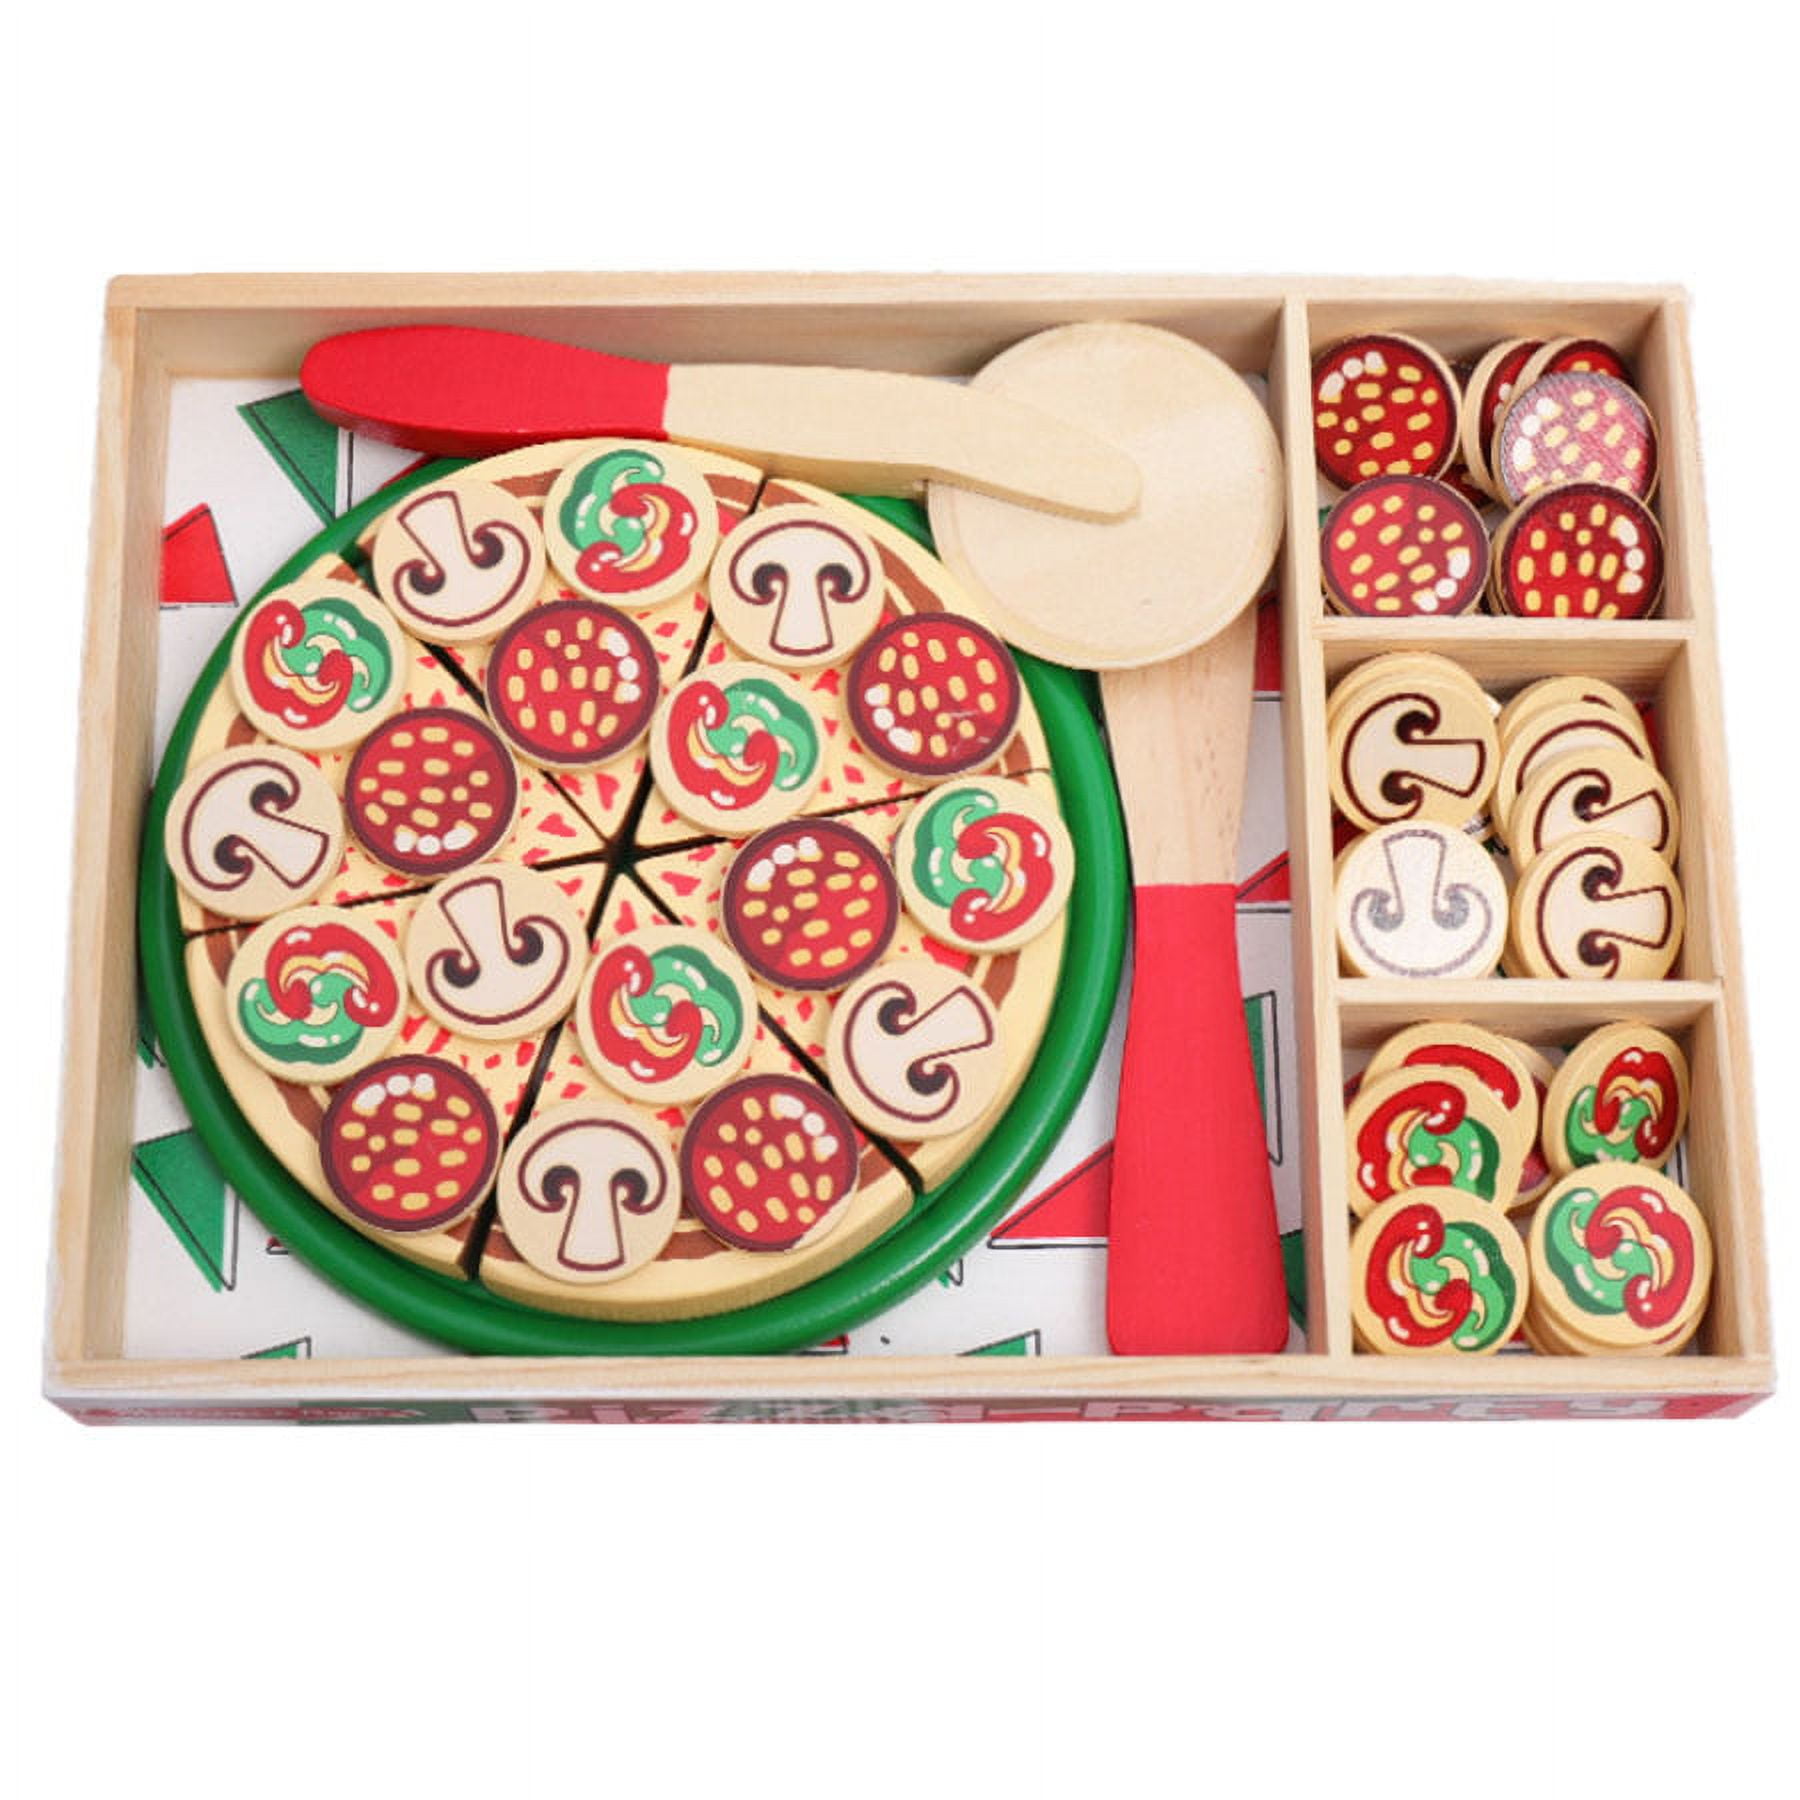  Pillowhale Wooden Toys Pizza Oven with Toppings &  Accessories,Wooden Pizza Counter Playset,Pretend Play Pizza Making Toy Set  for Kids Boys Girls 3+ : Toys & Games